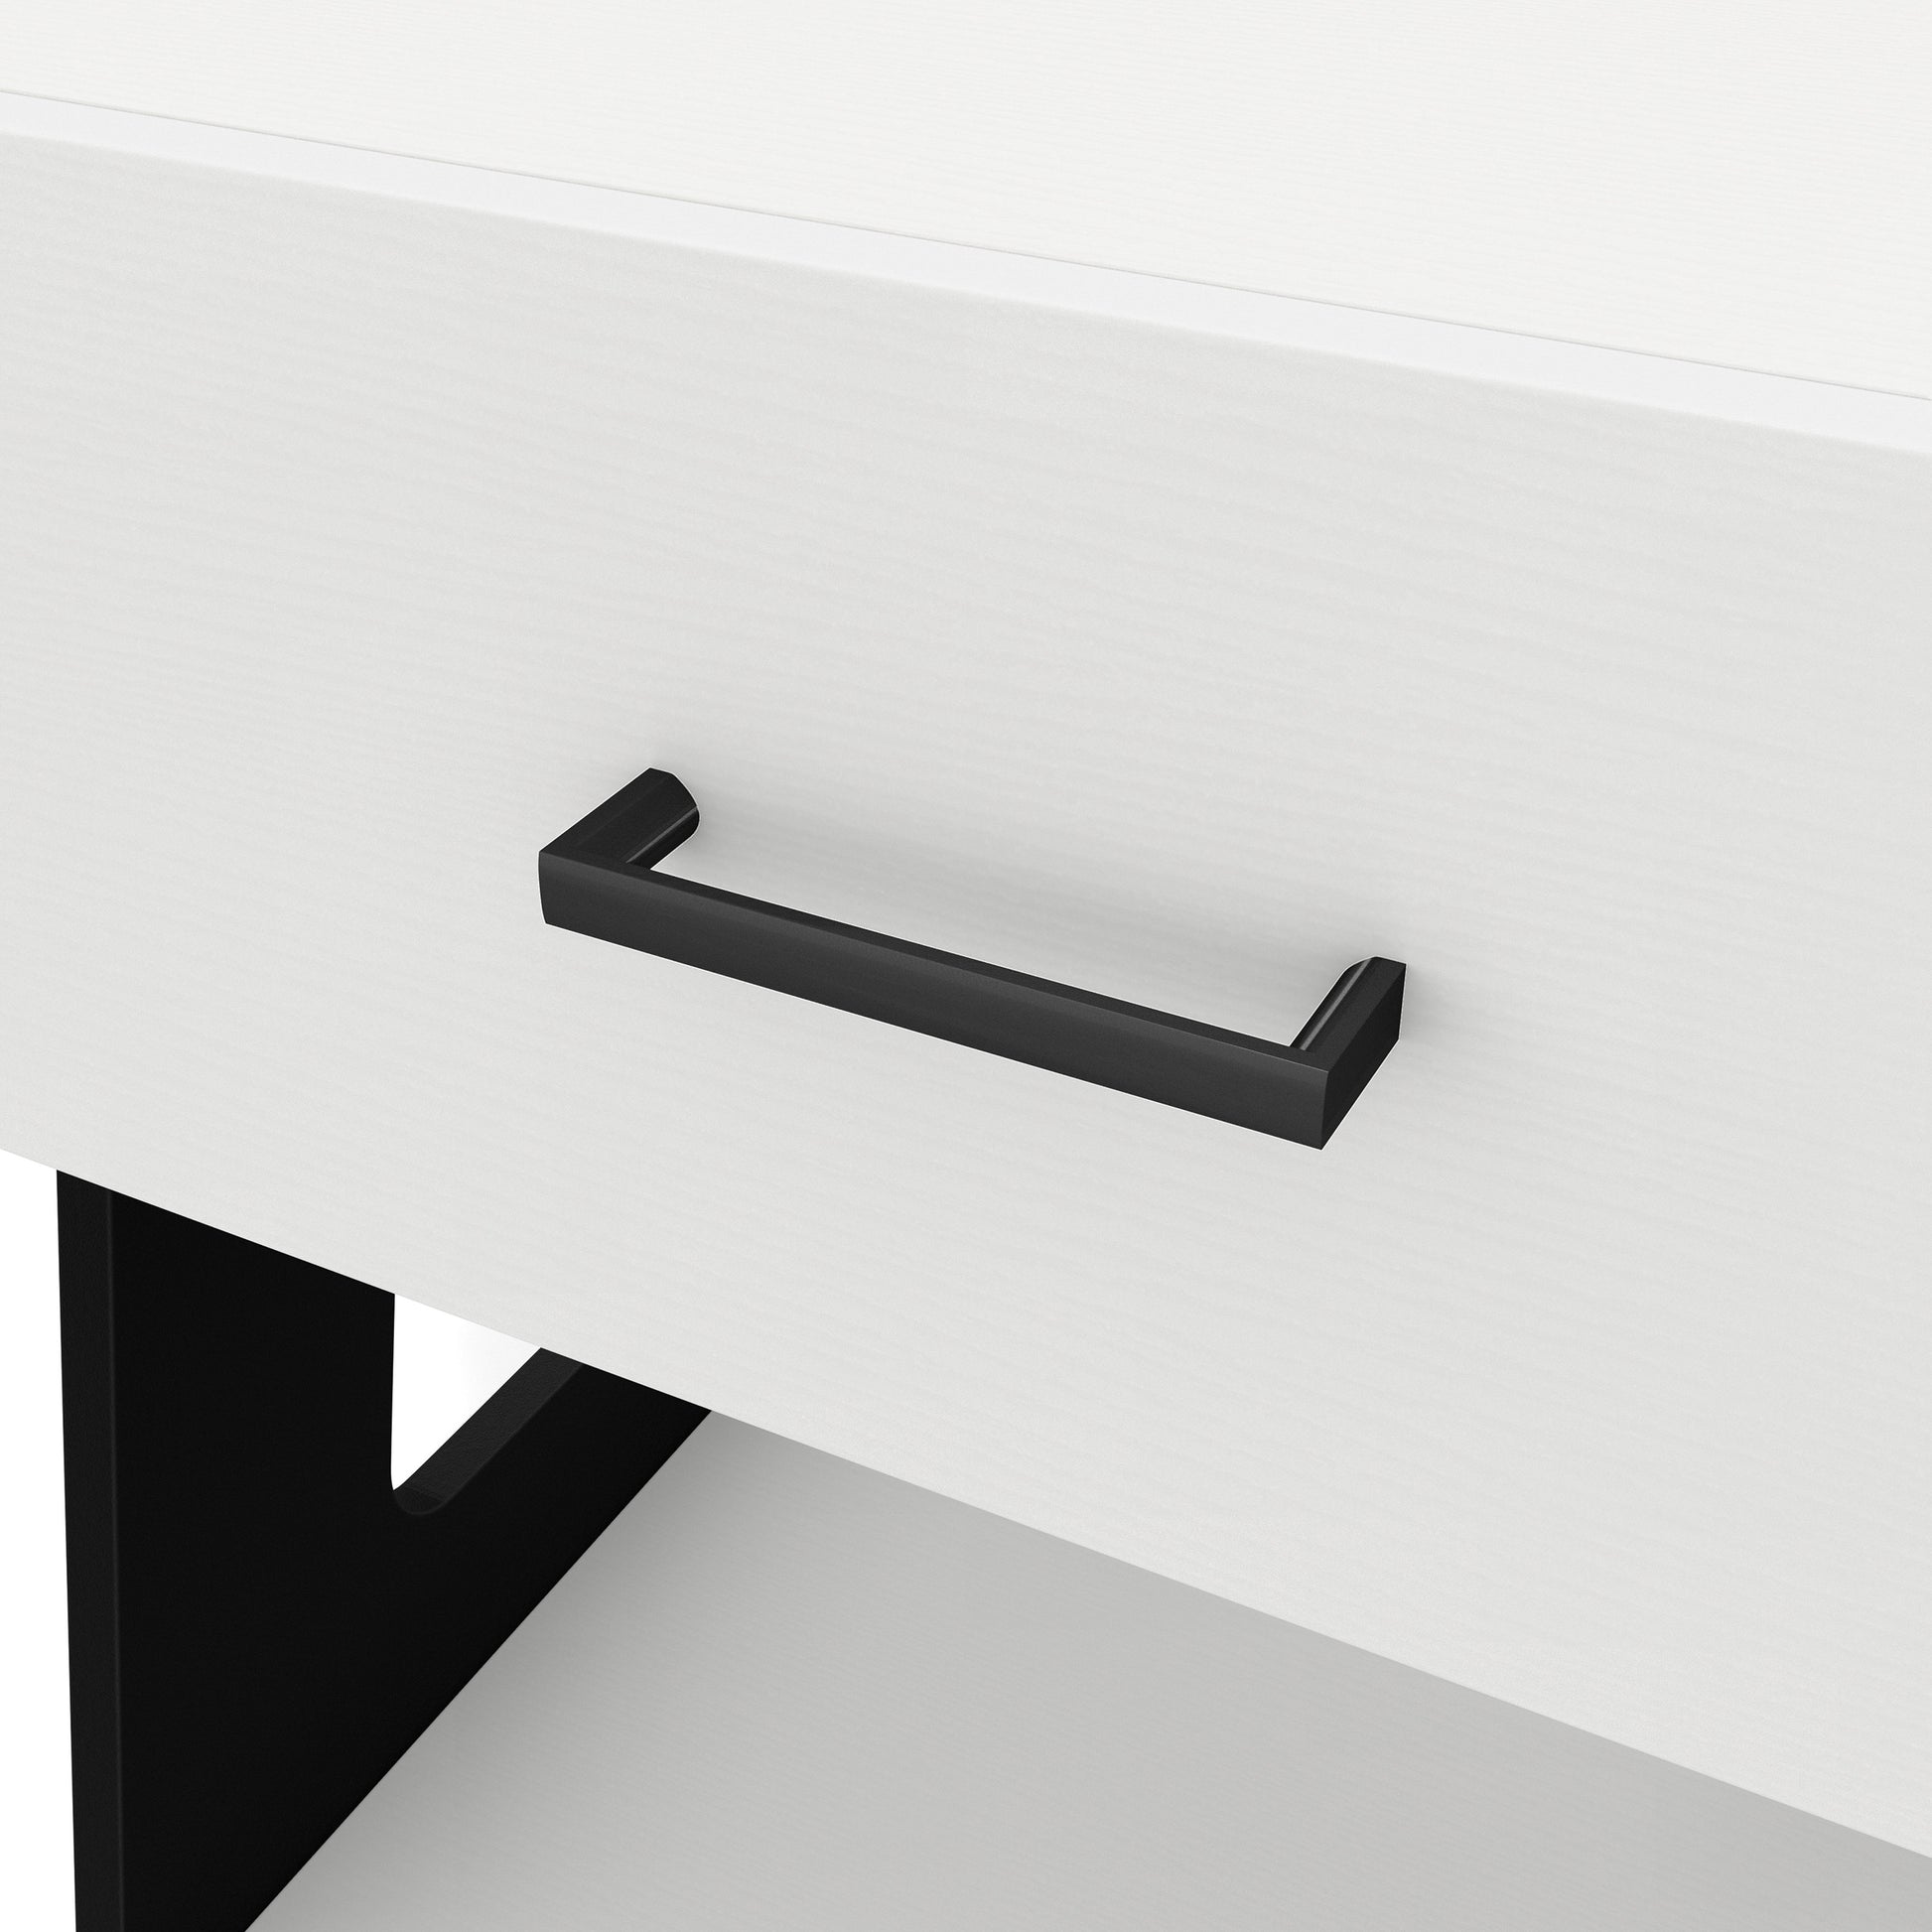 Left angled drawer pull close-up view of a contemporary white and black one-drawer side table with a shelf on a white background